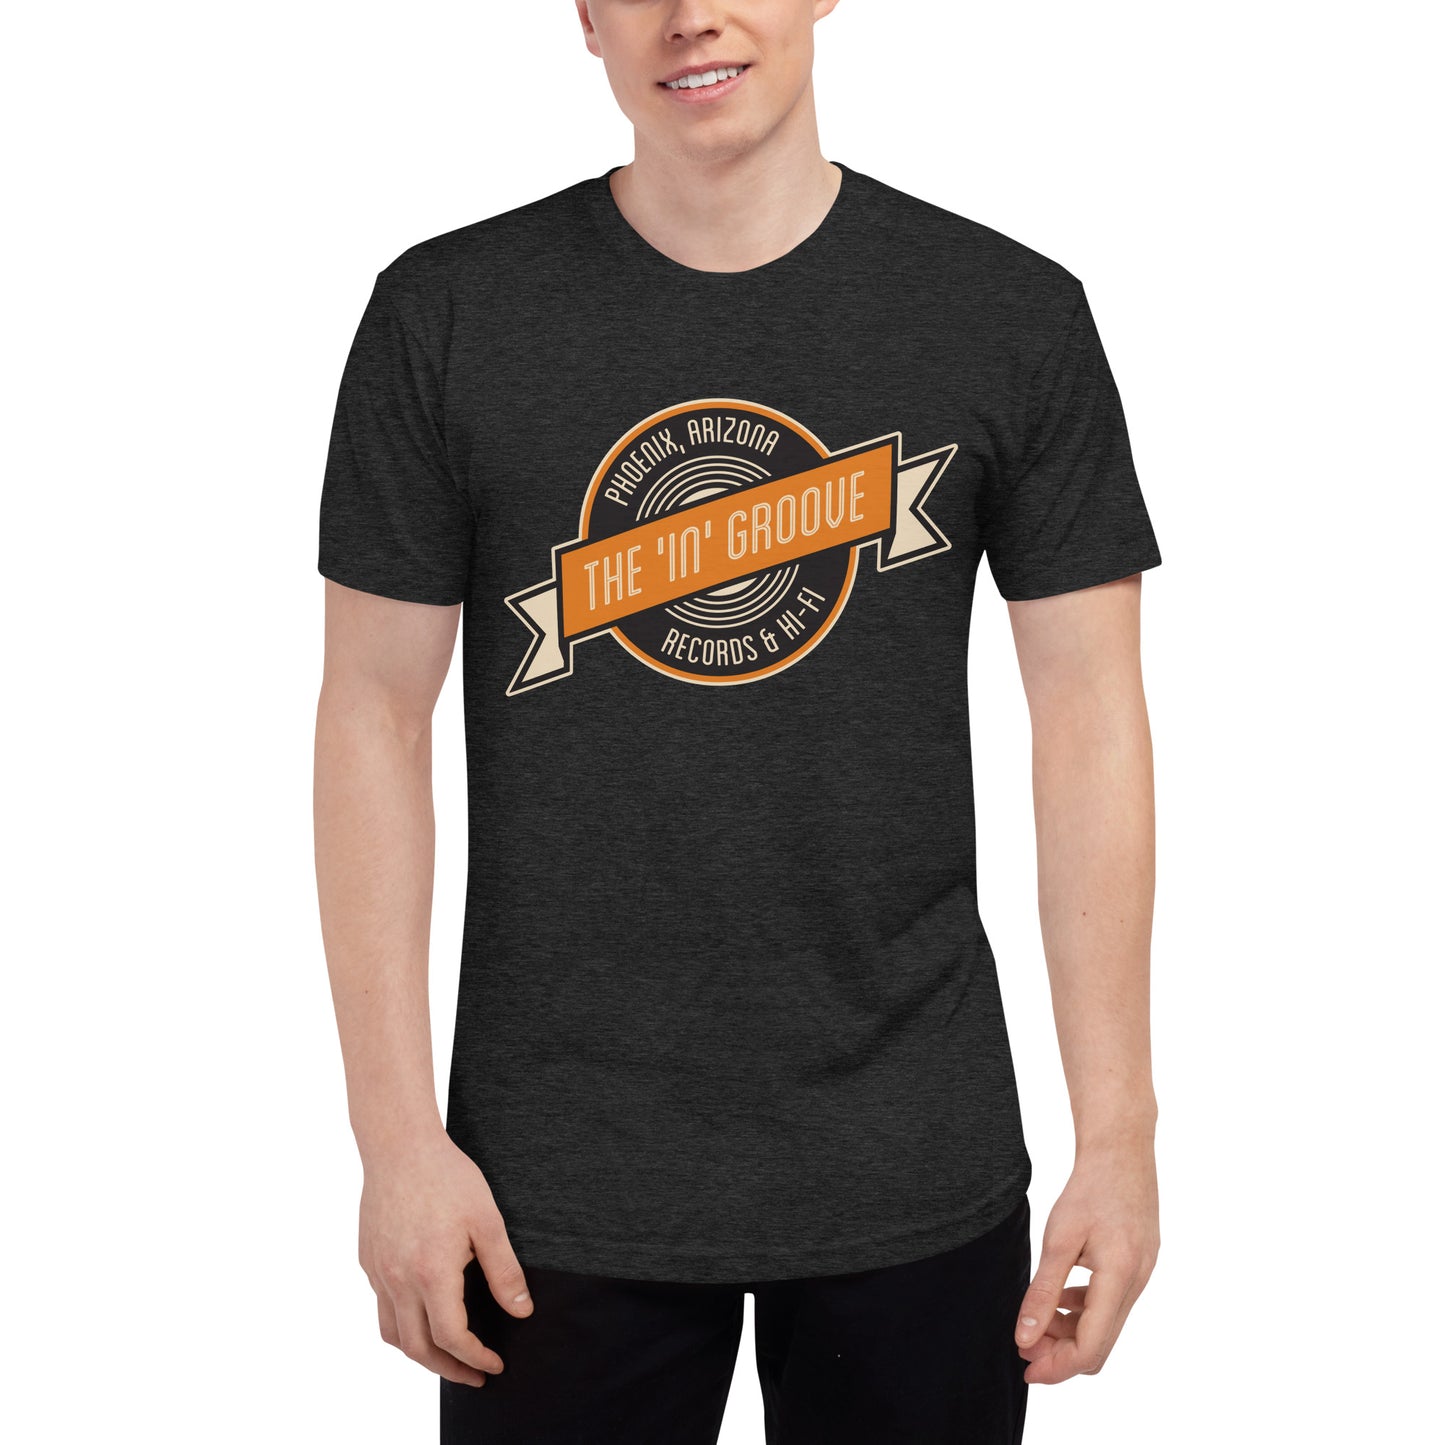 Das „In“ Groove Record Store T-Shirt